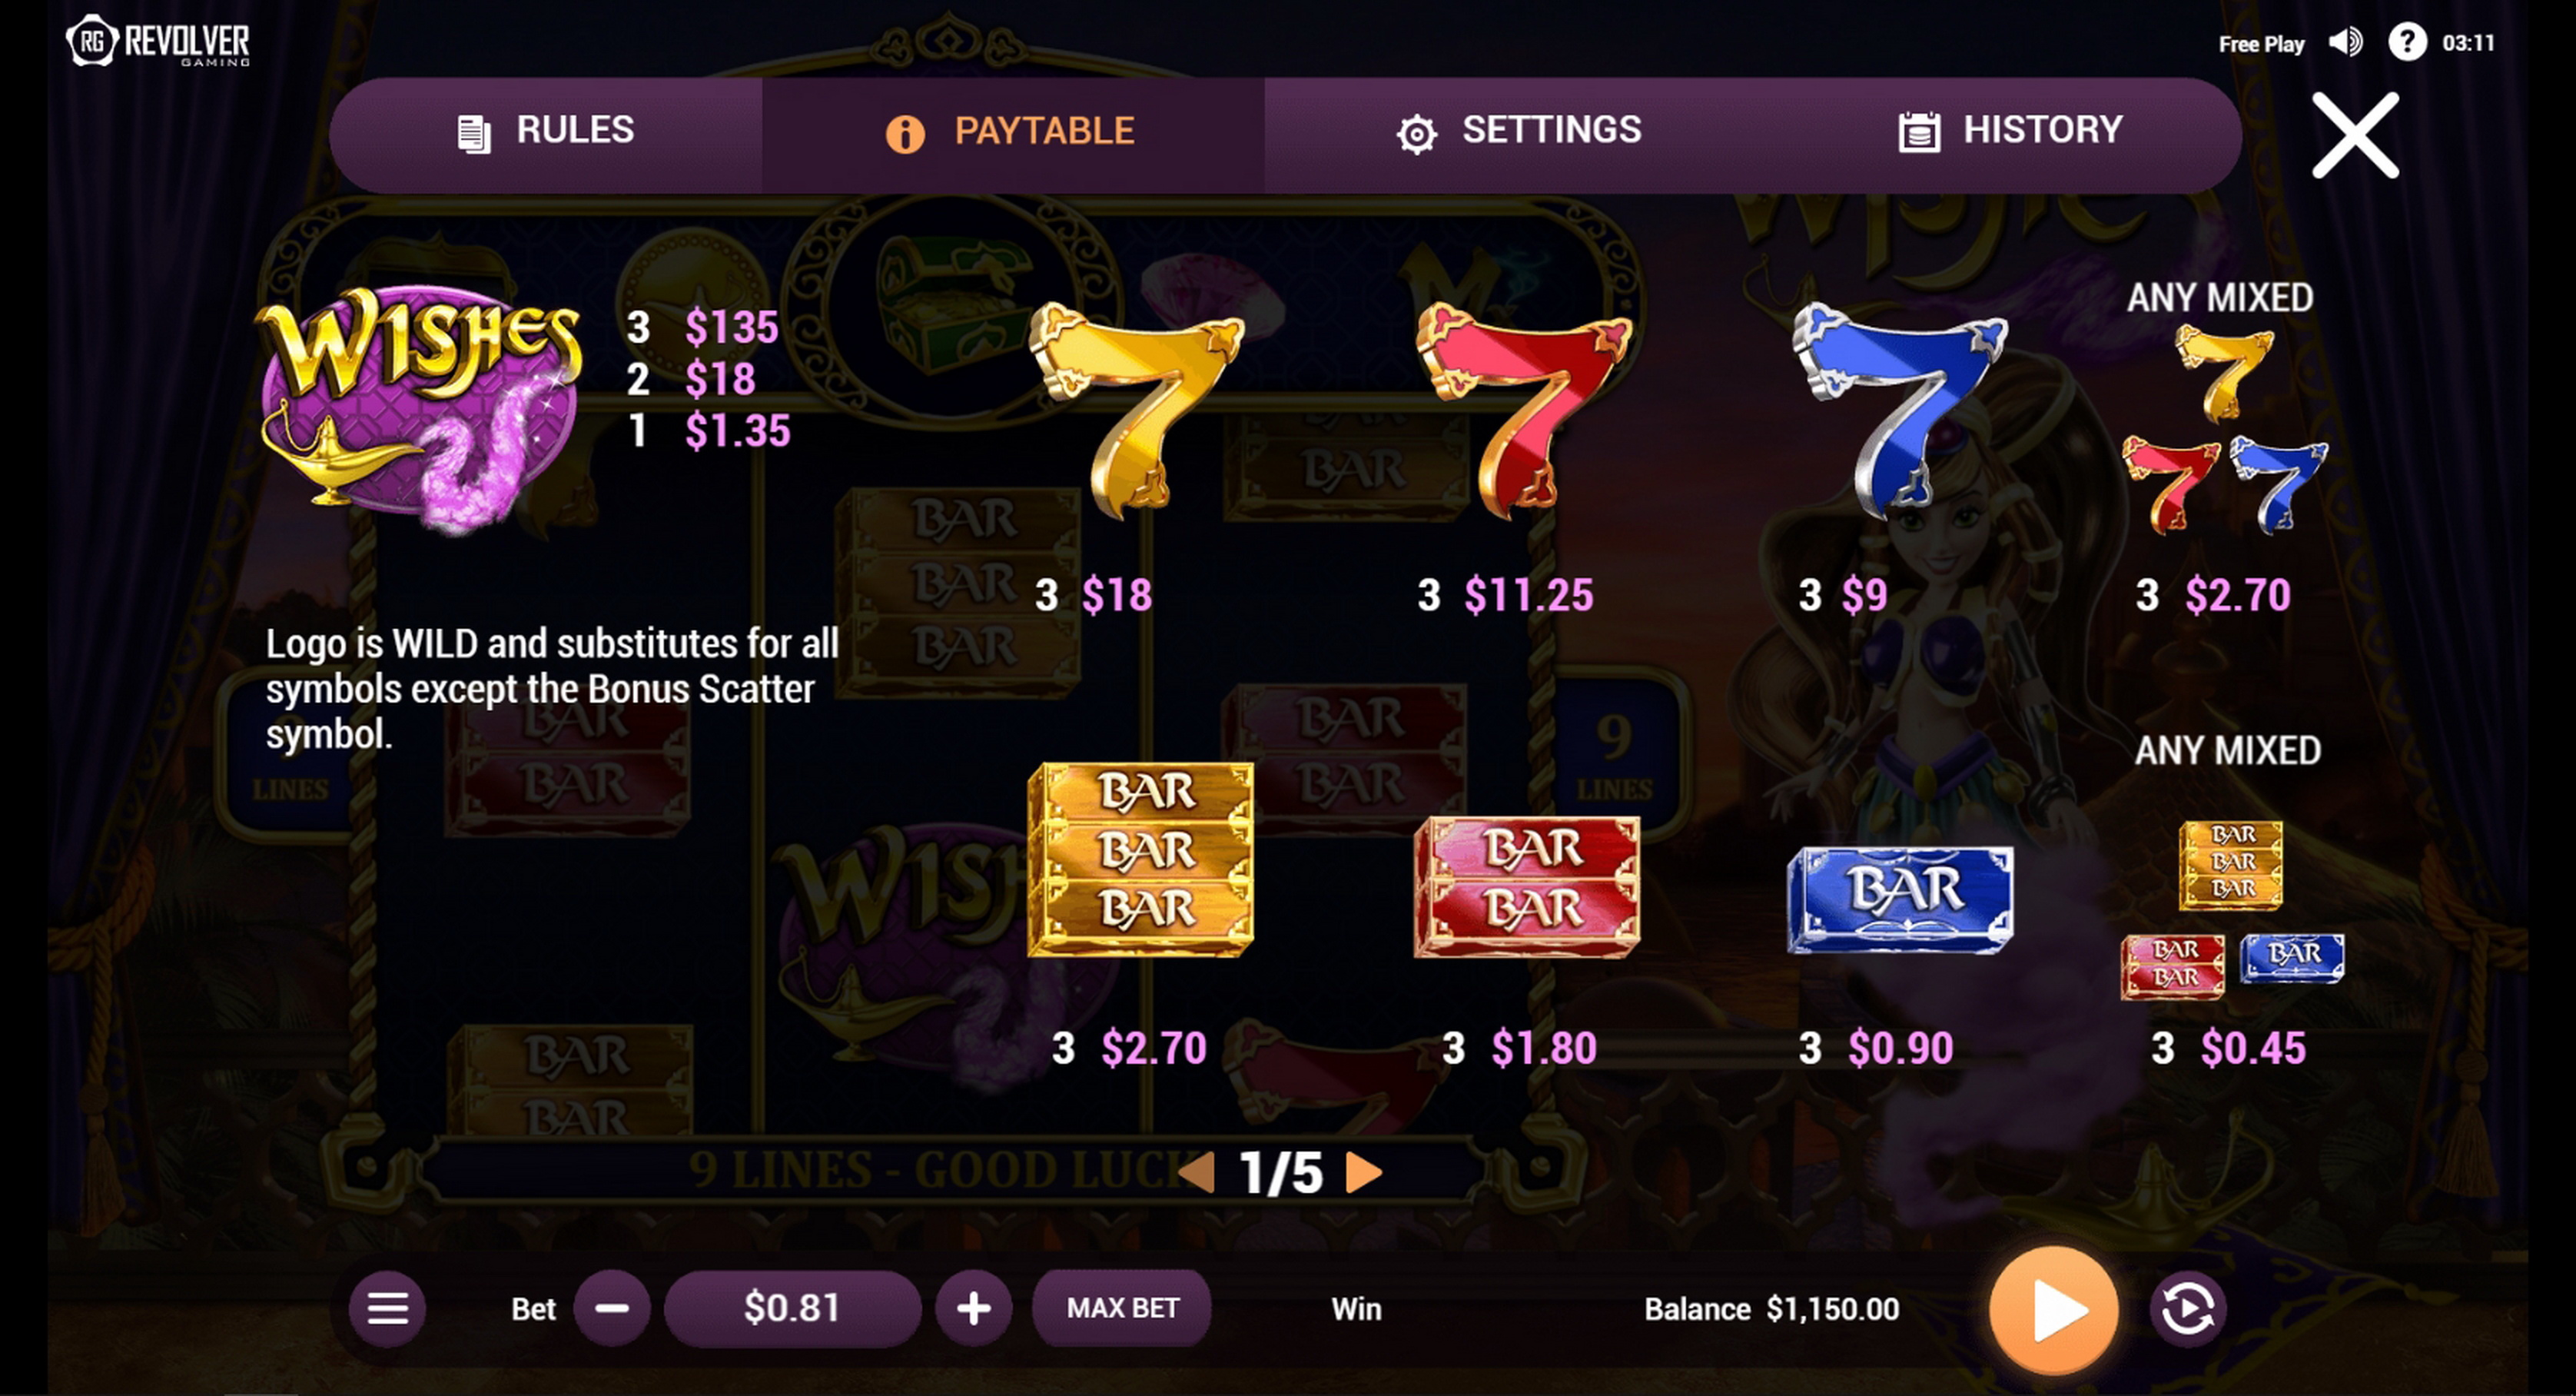 Info of Wishes Slot Game by Revolver Gaming